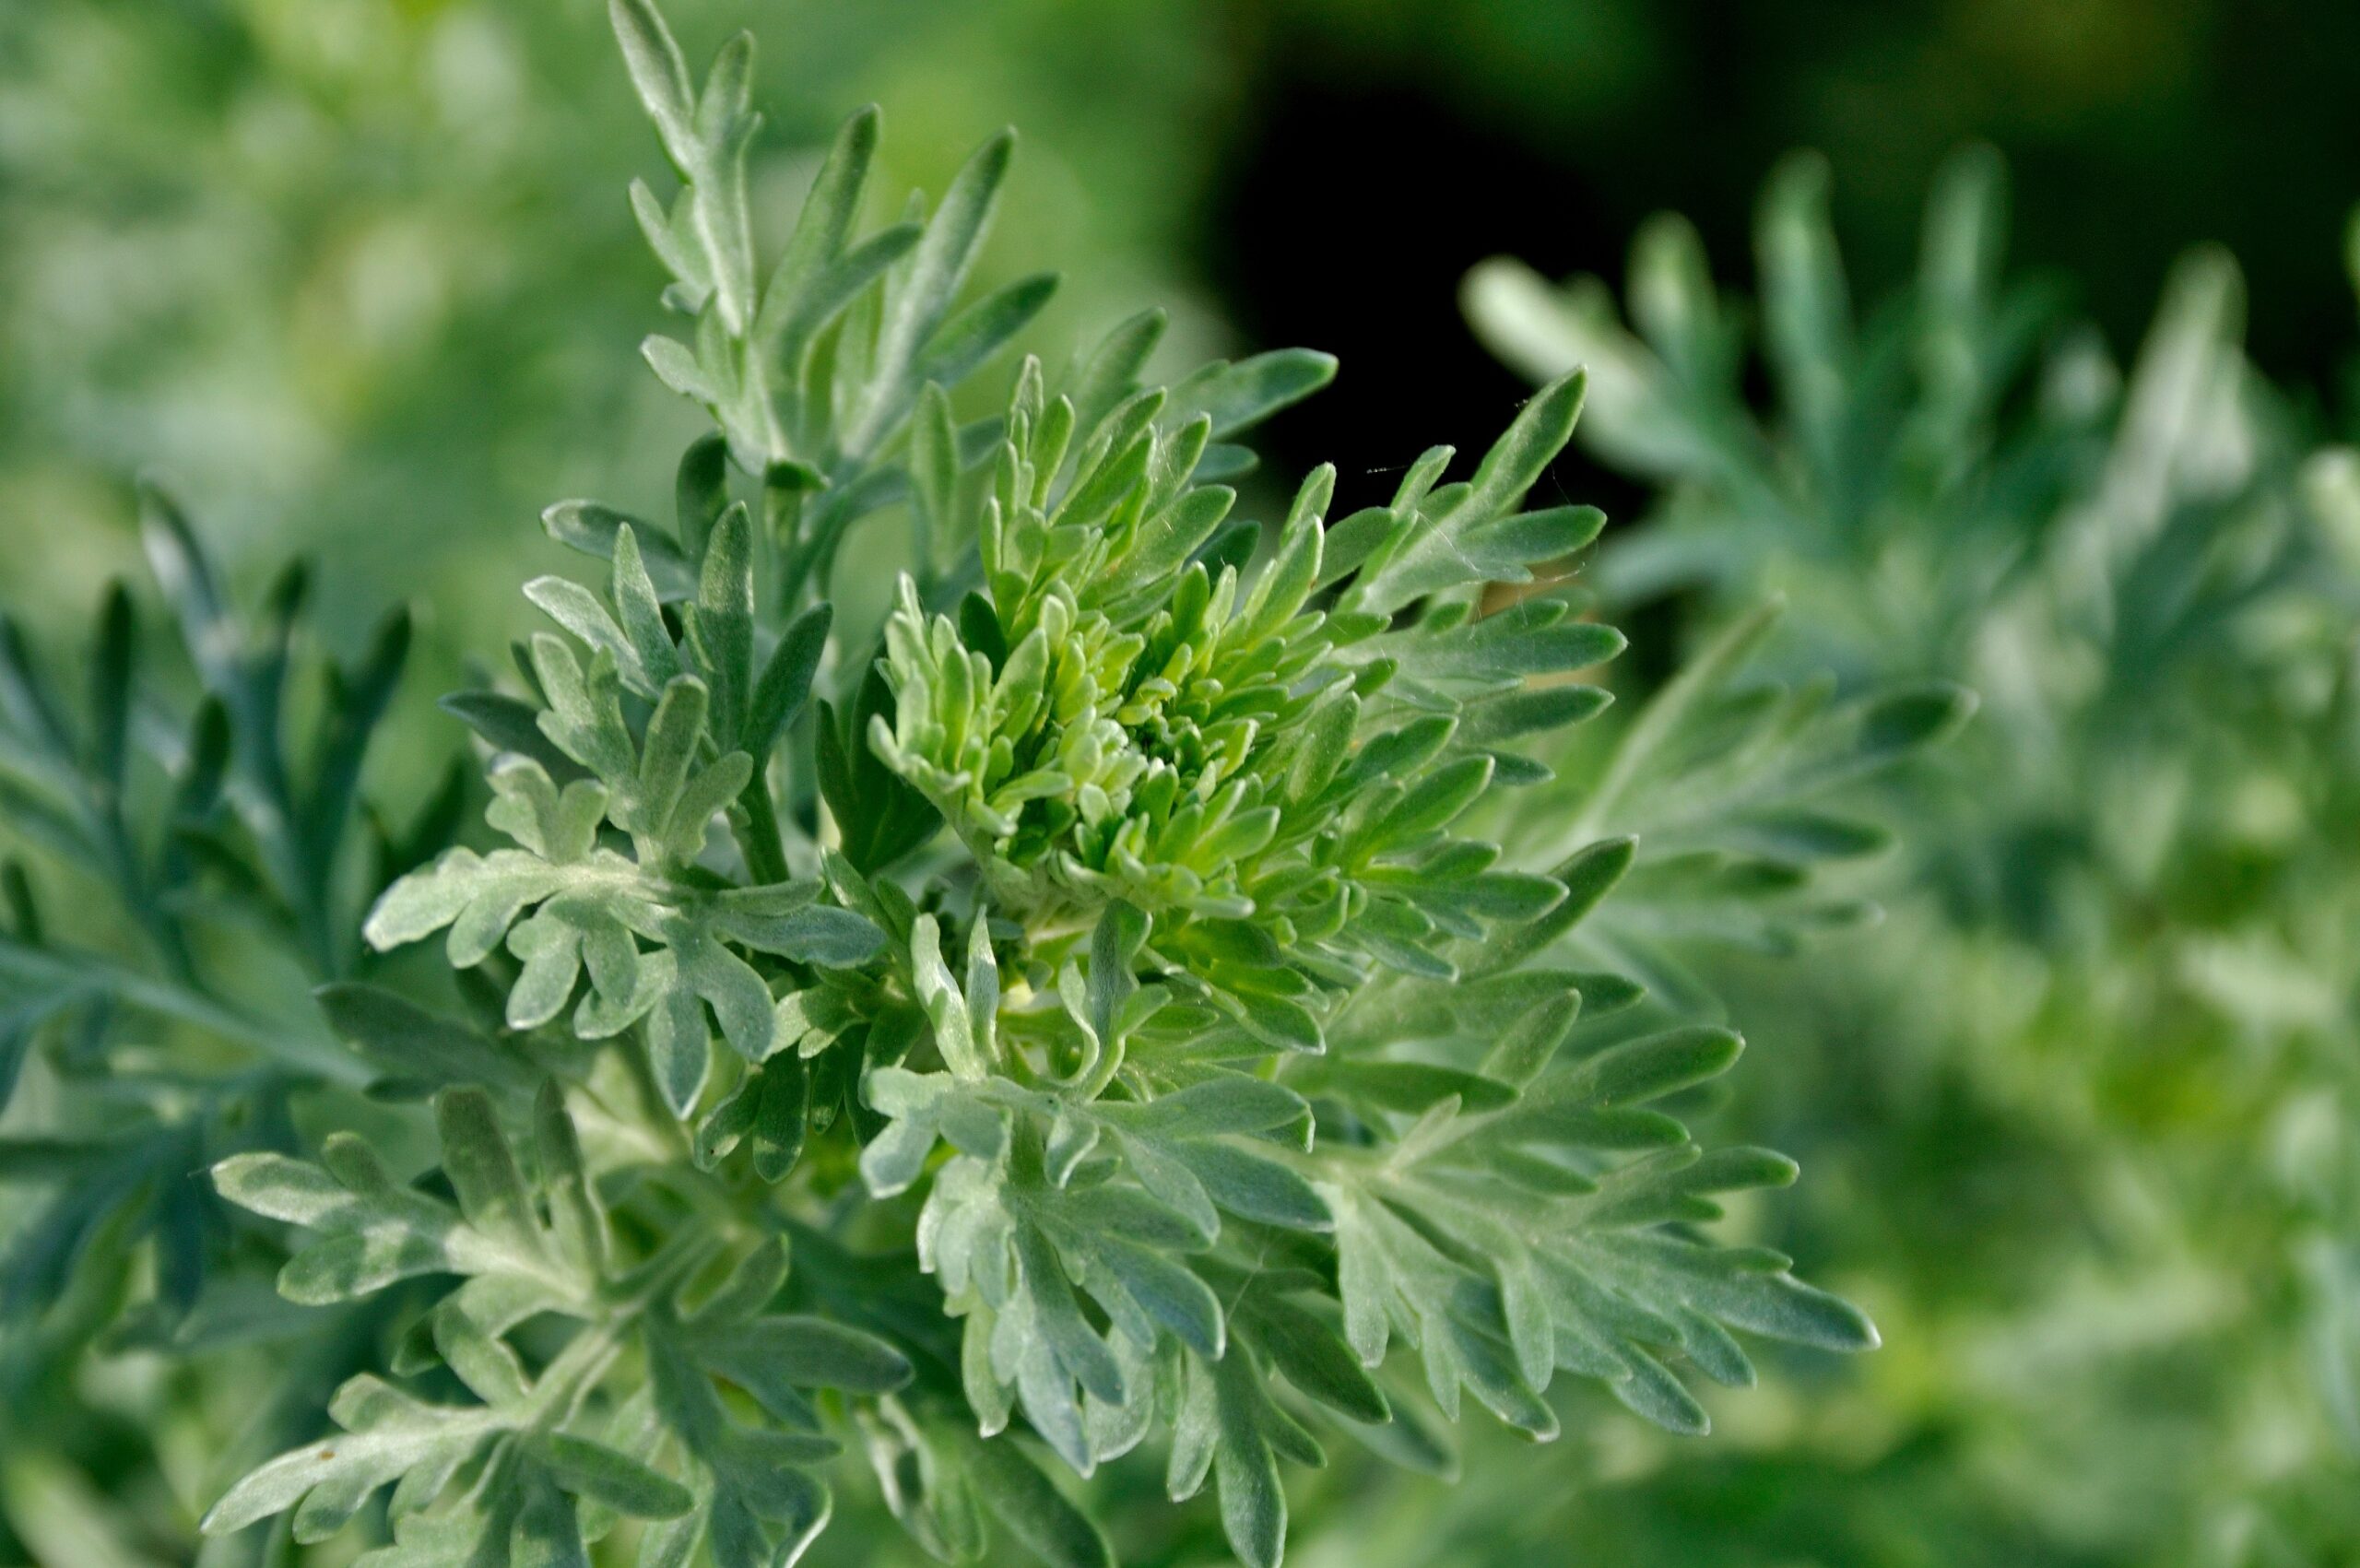 Medicinal plants: Wormwood can help against these complaints